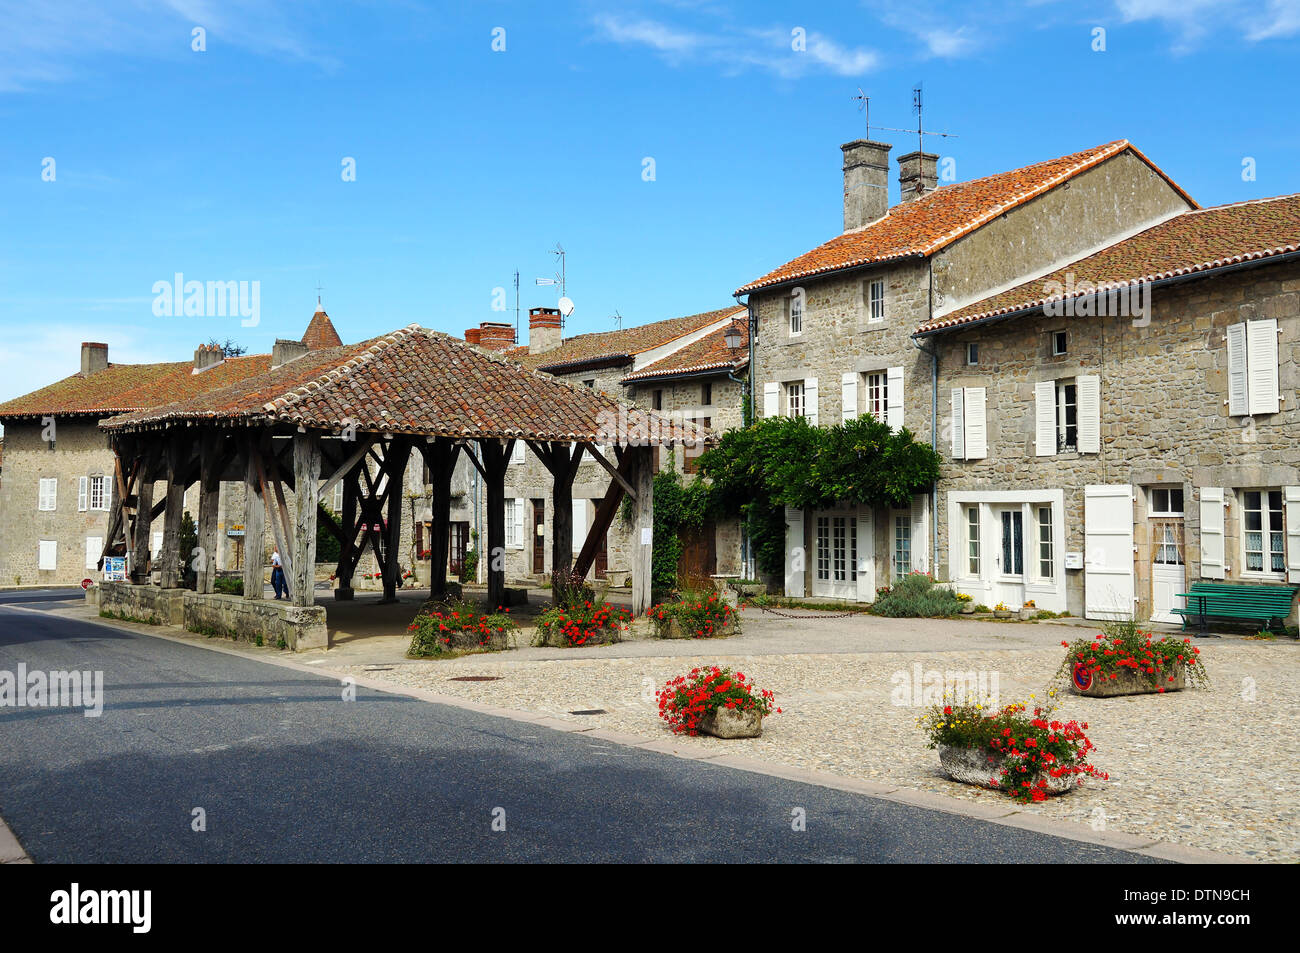 Old covered market hall and stone houses in the village of Mortemart, Haute-Vienne, Limousin, France Stock Photo